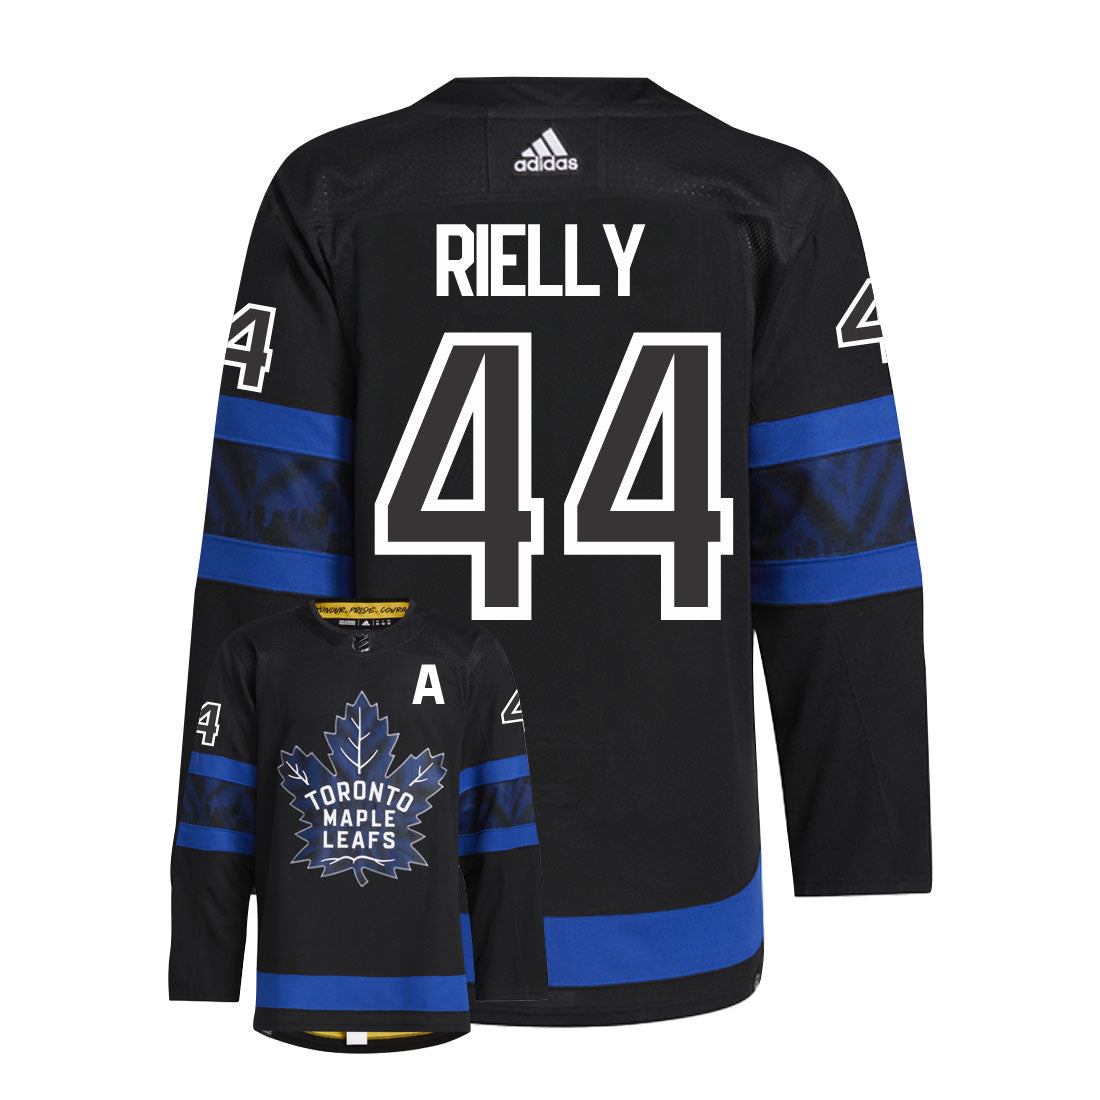 Morgan Rielly Toronto Maple Leafs Adidas Primegreen Authentic Third Alternate NHL Hockey Jersey - Back/Front View